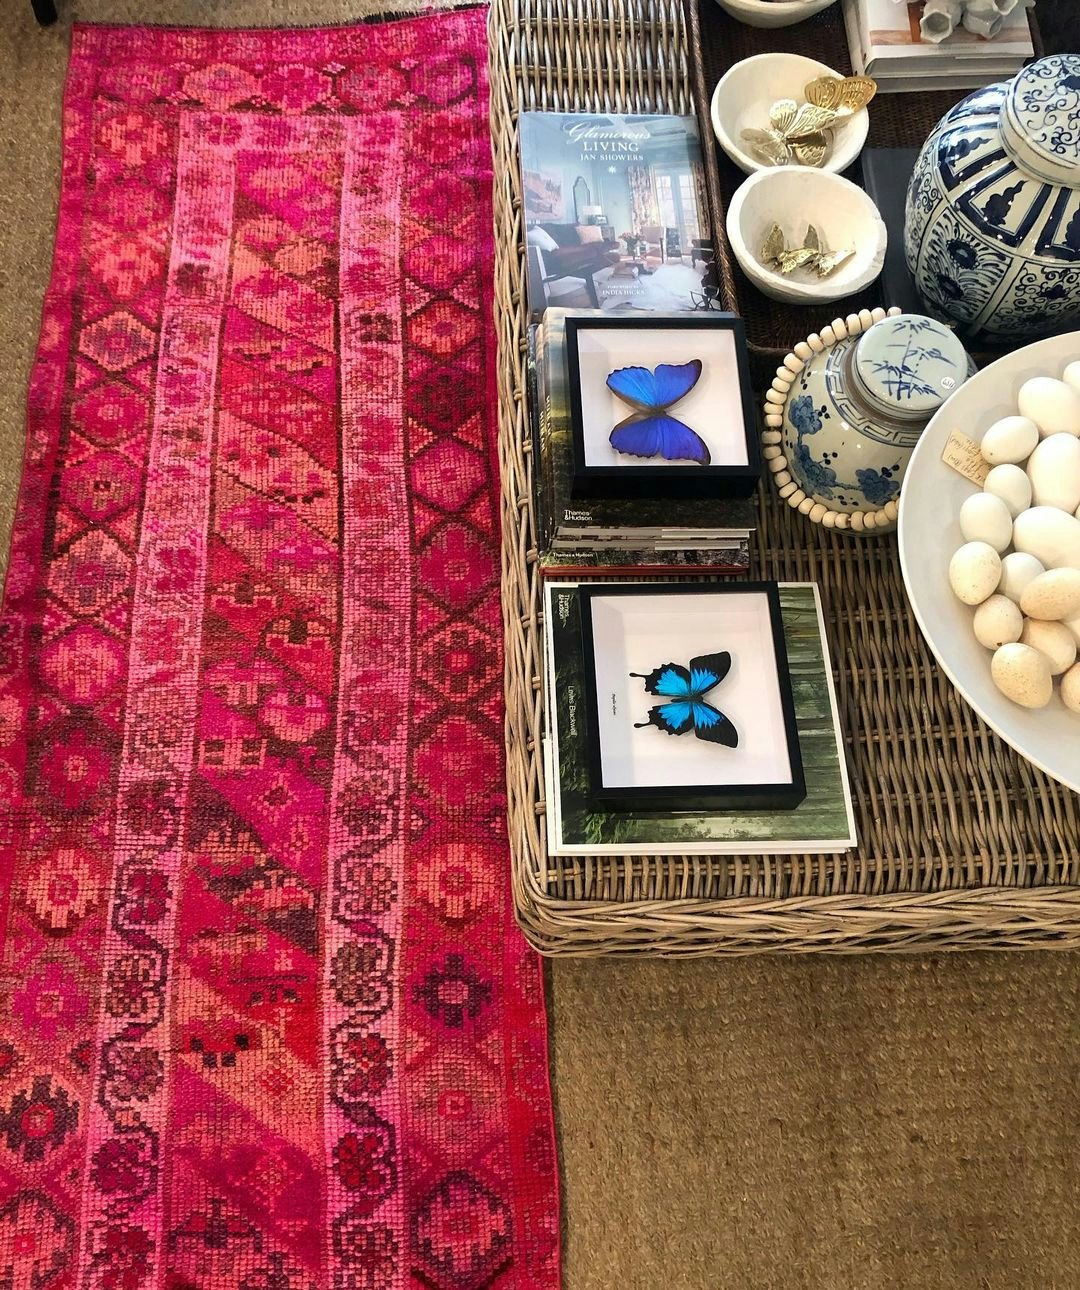 Pink turkish rug next to rattan coffee table with pots on it